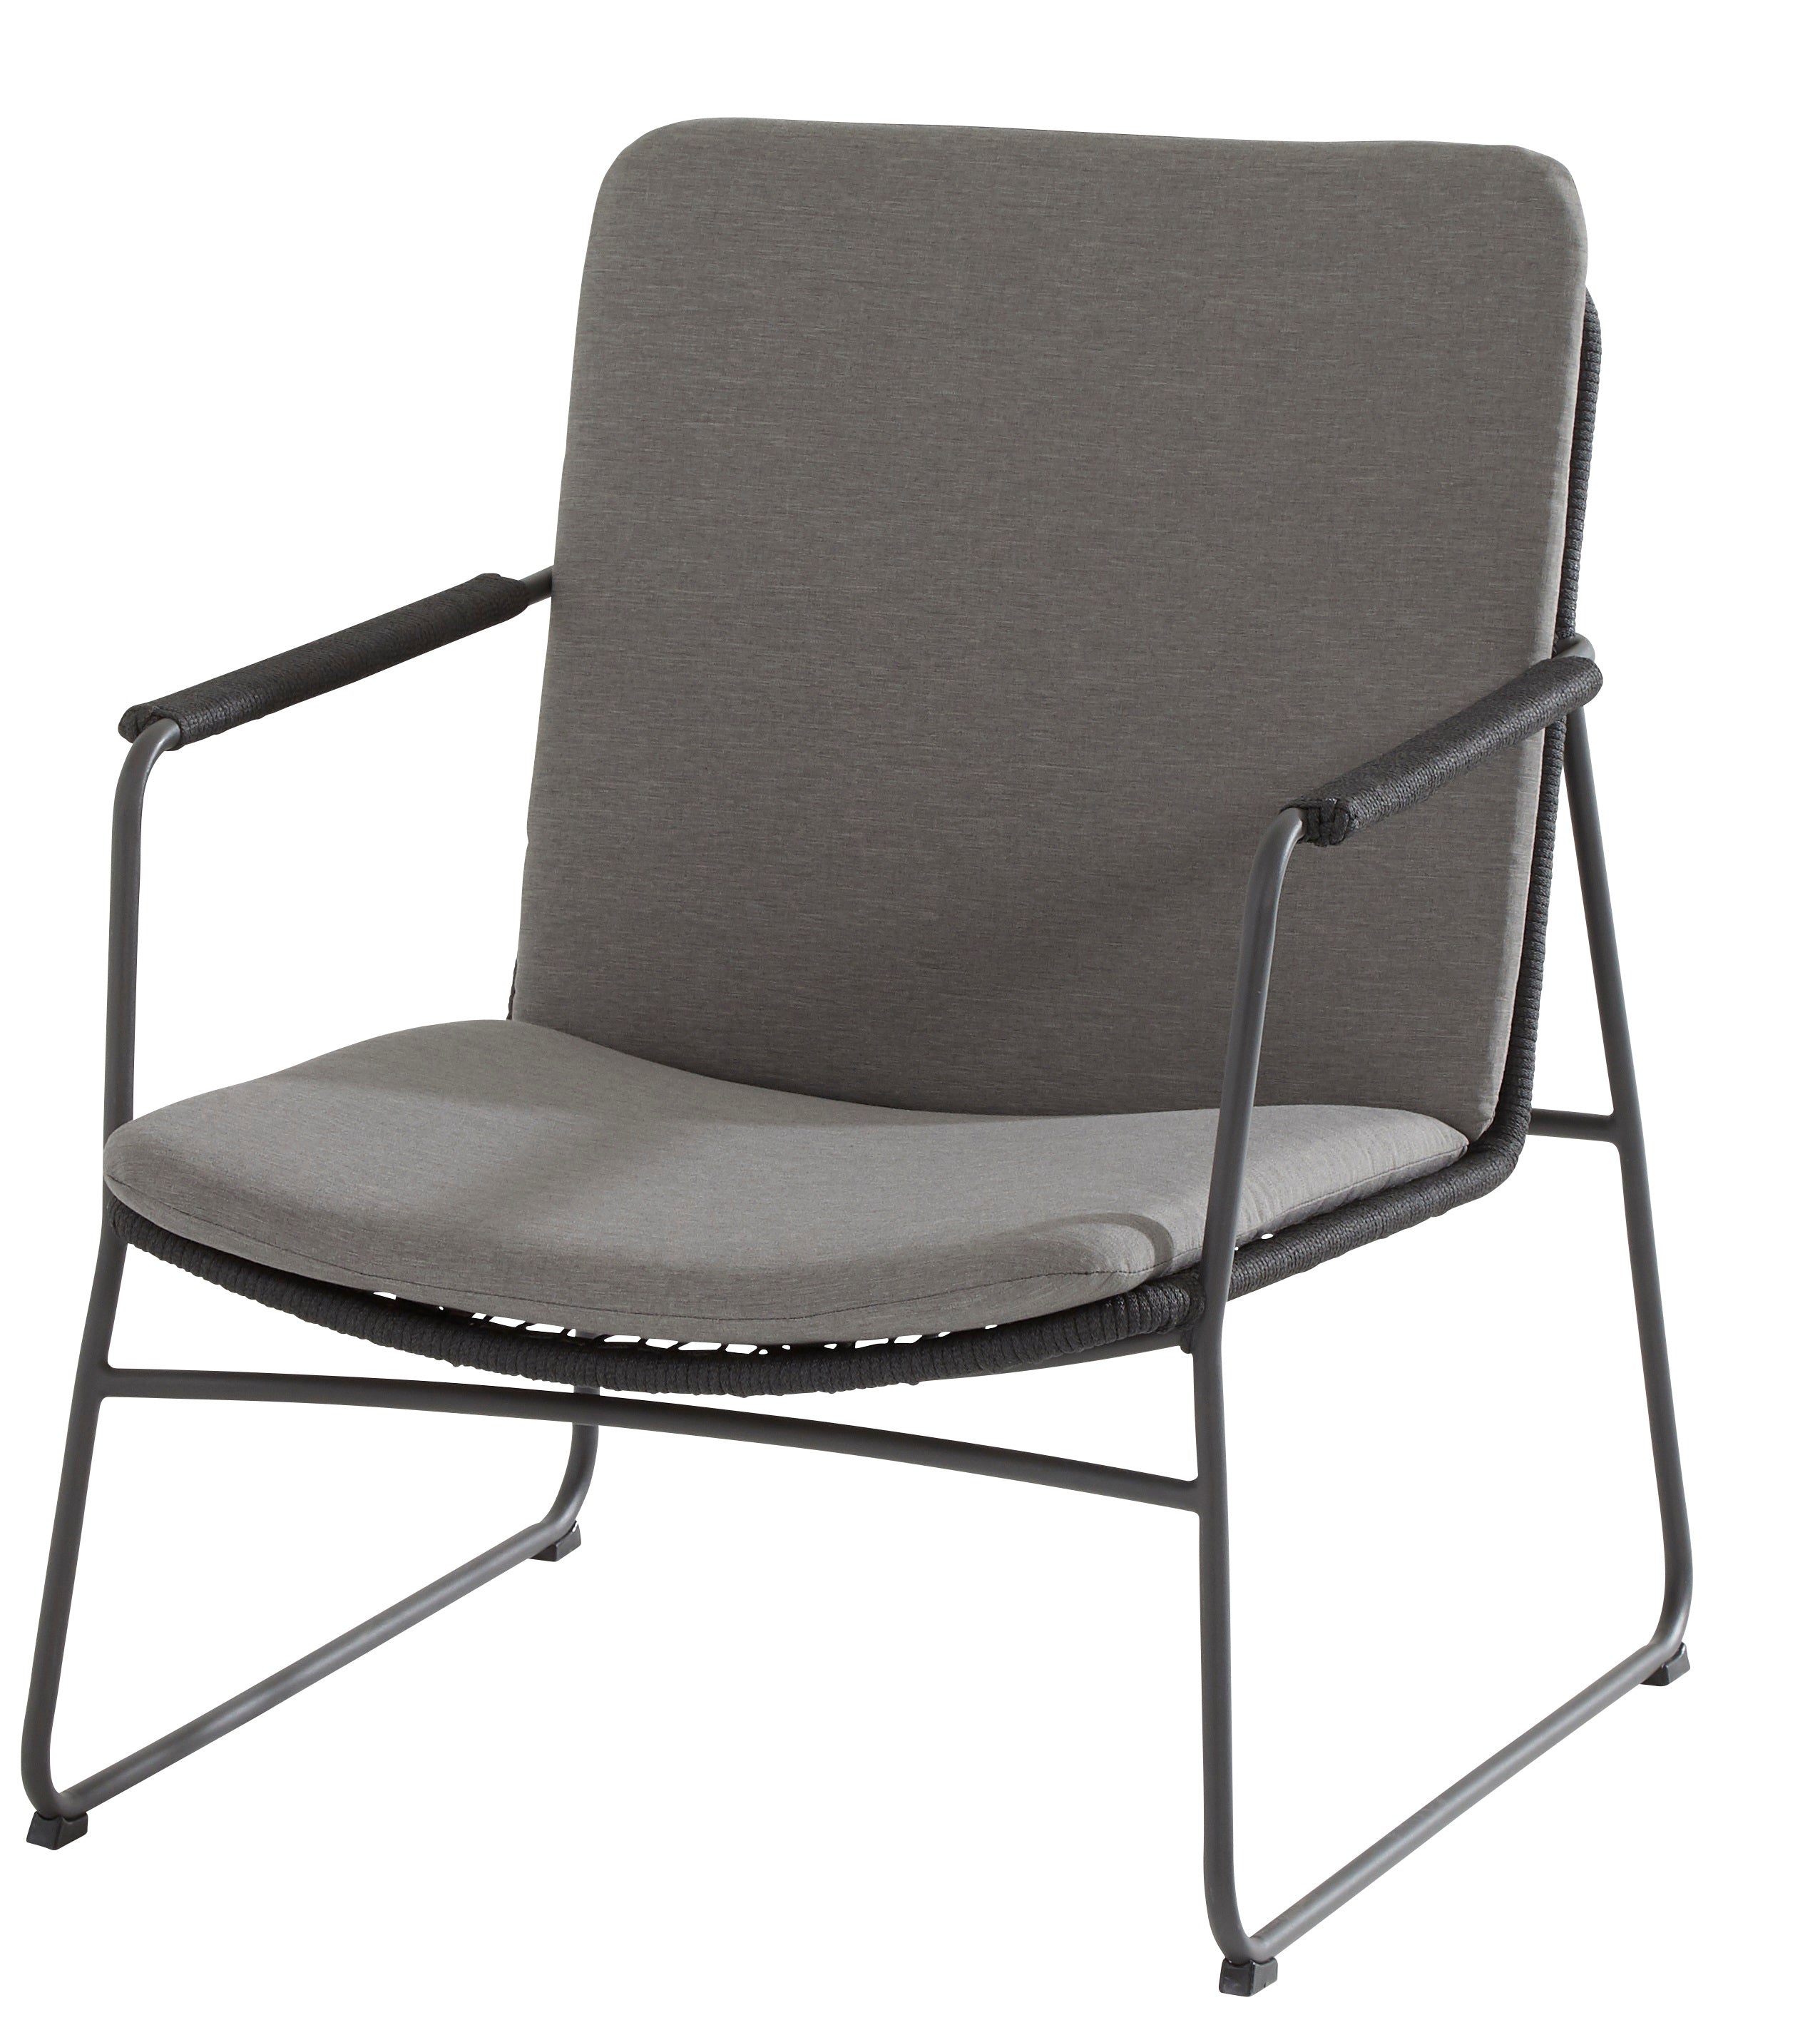 4 Seasons Outdoor Elba Living Chair With Seat And Back Cushion